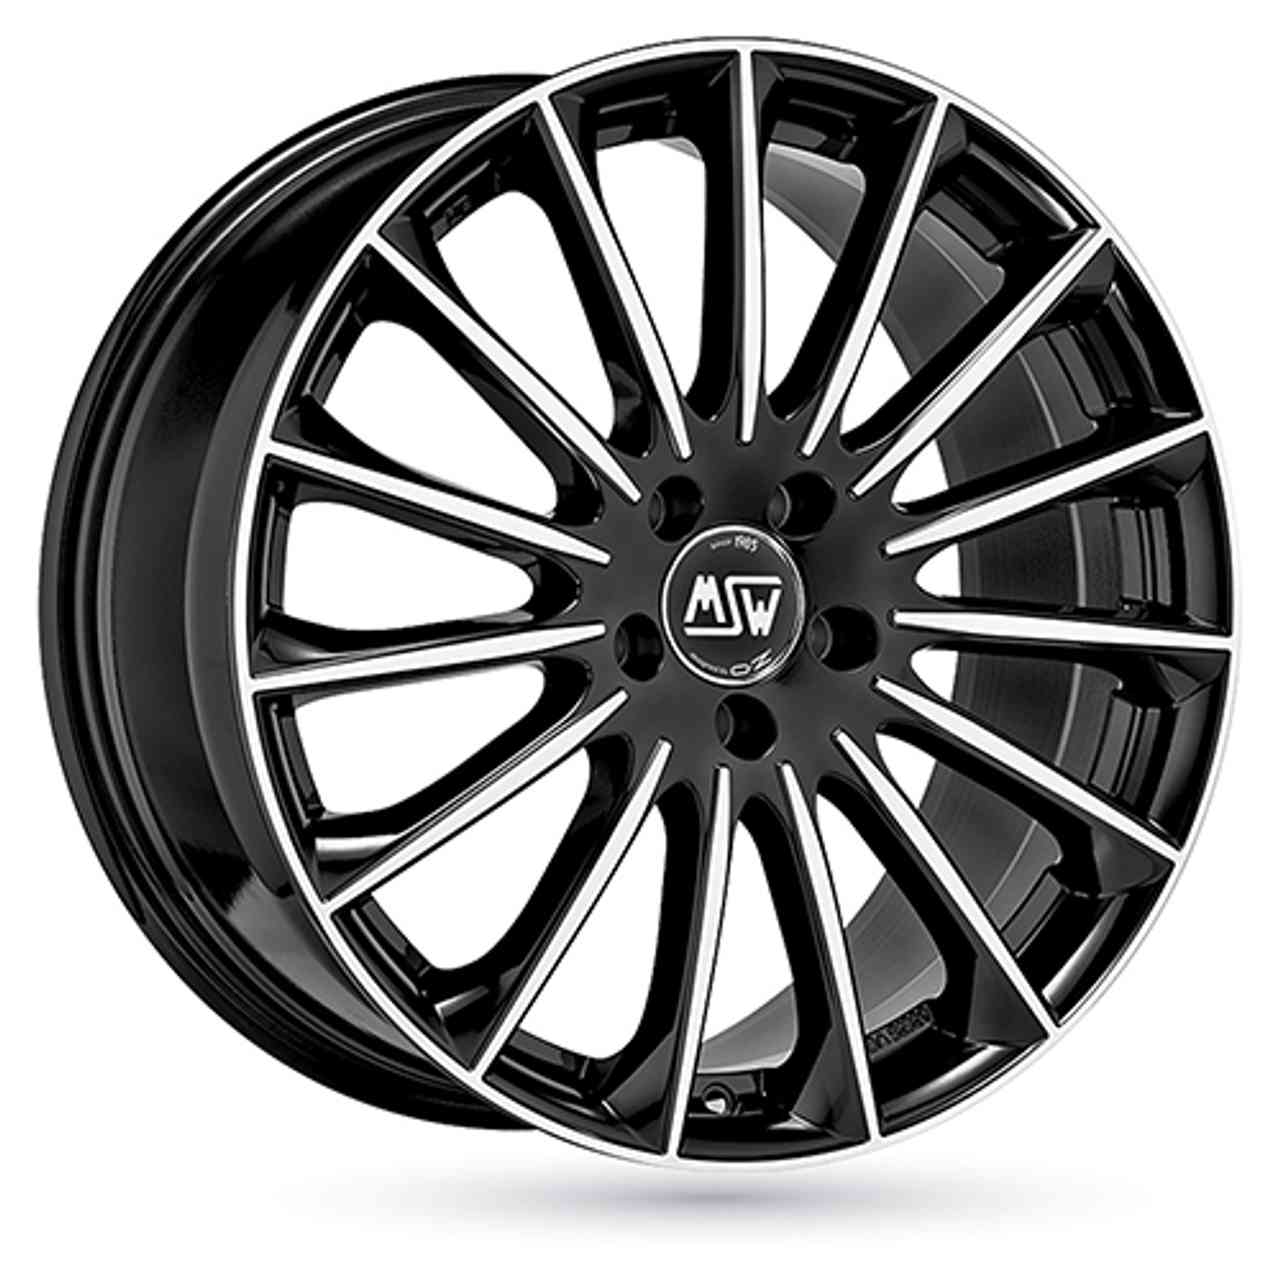 MSW (OZ) MSW 30 gloss black full polished 8.5Jx19 5x112 ET50